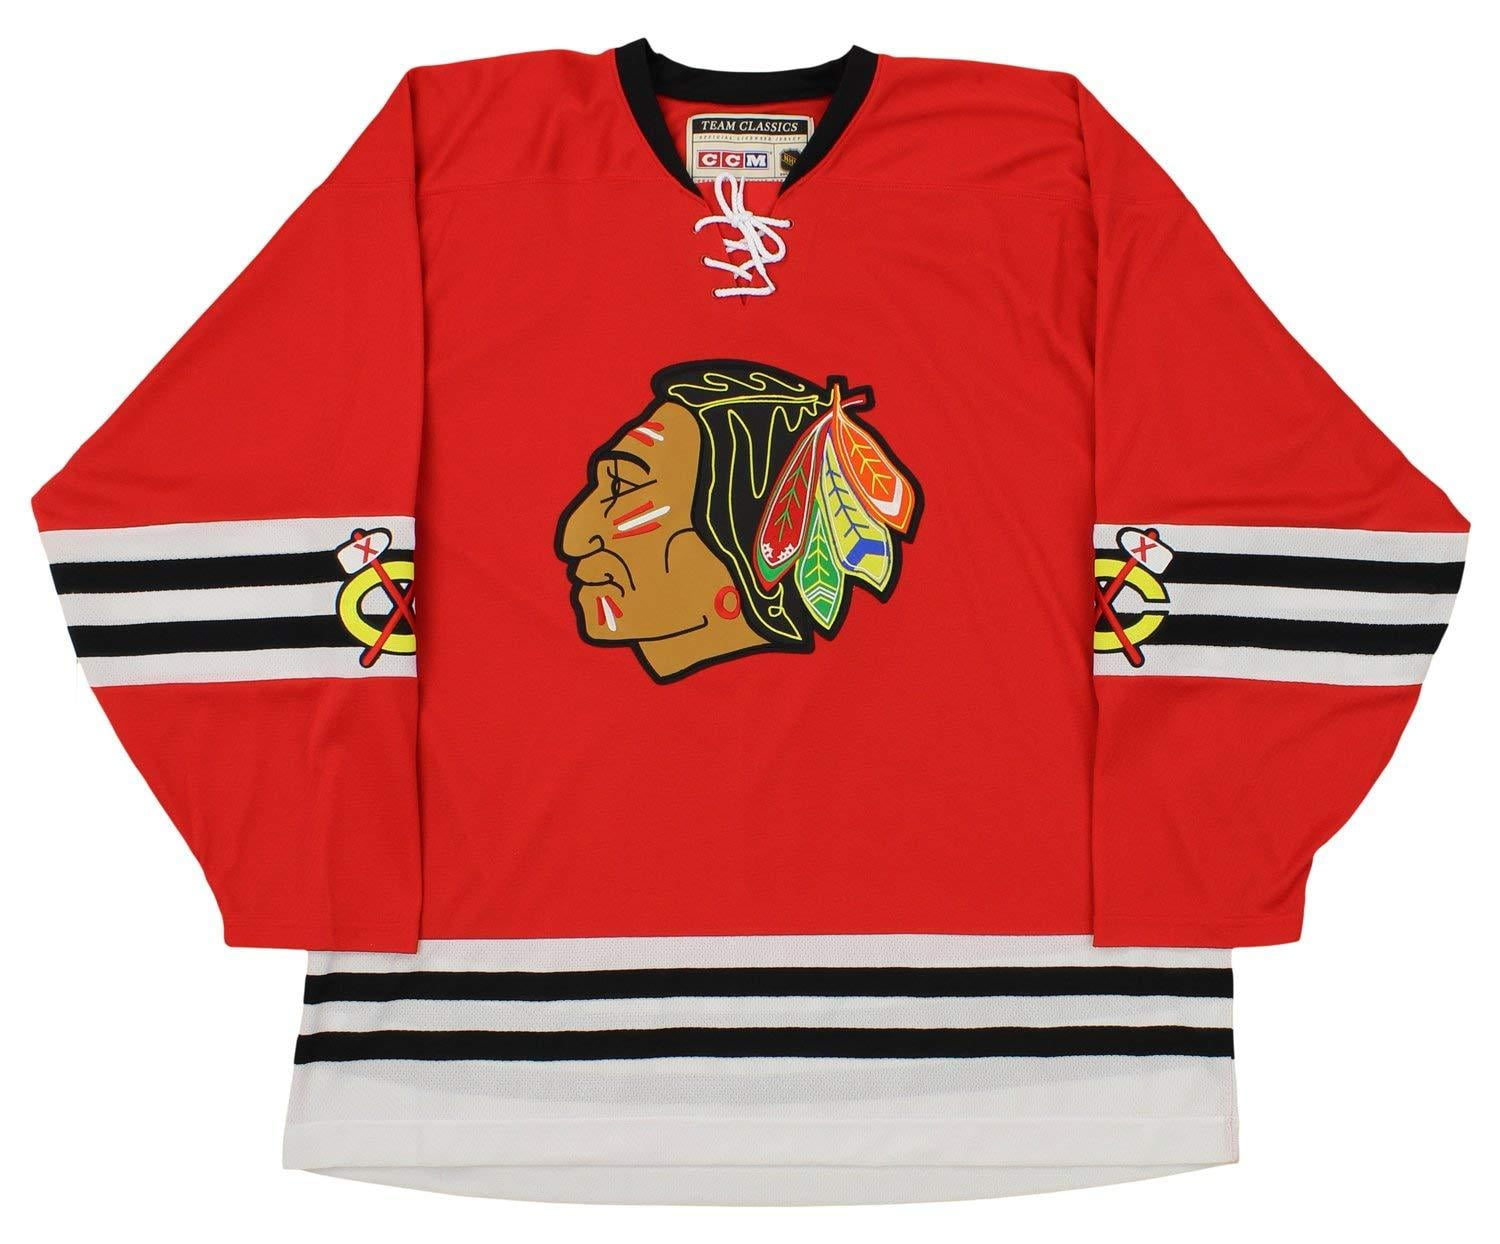 where can i buy a blackhawks jersey